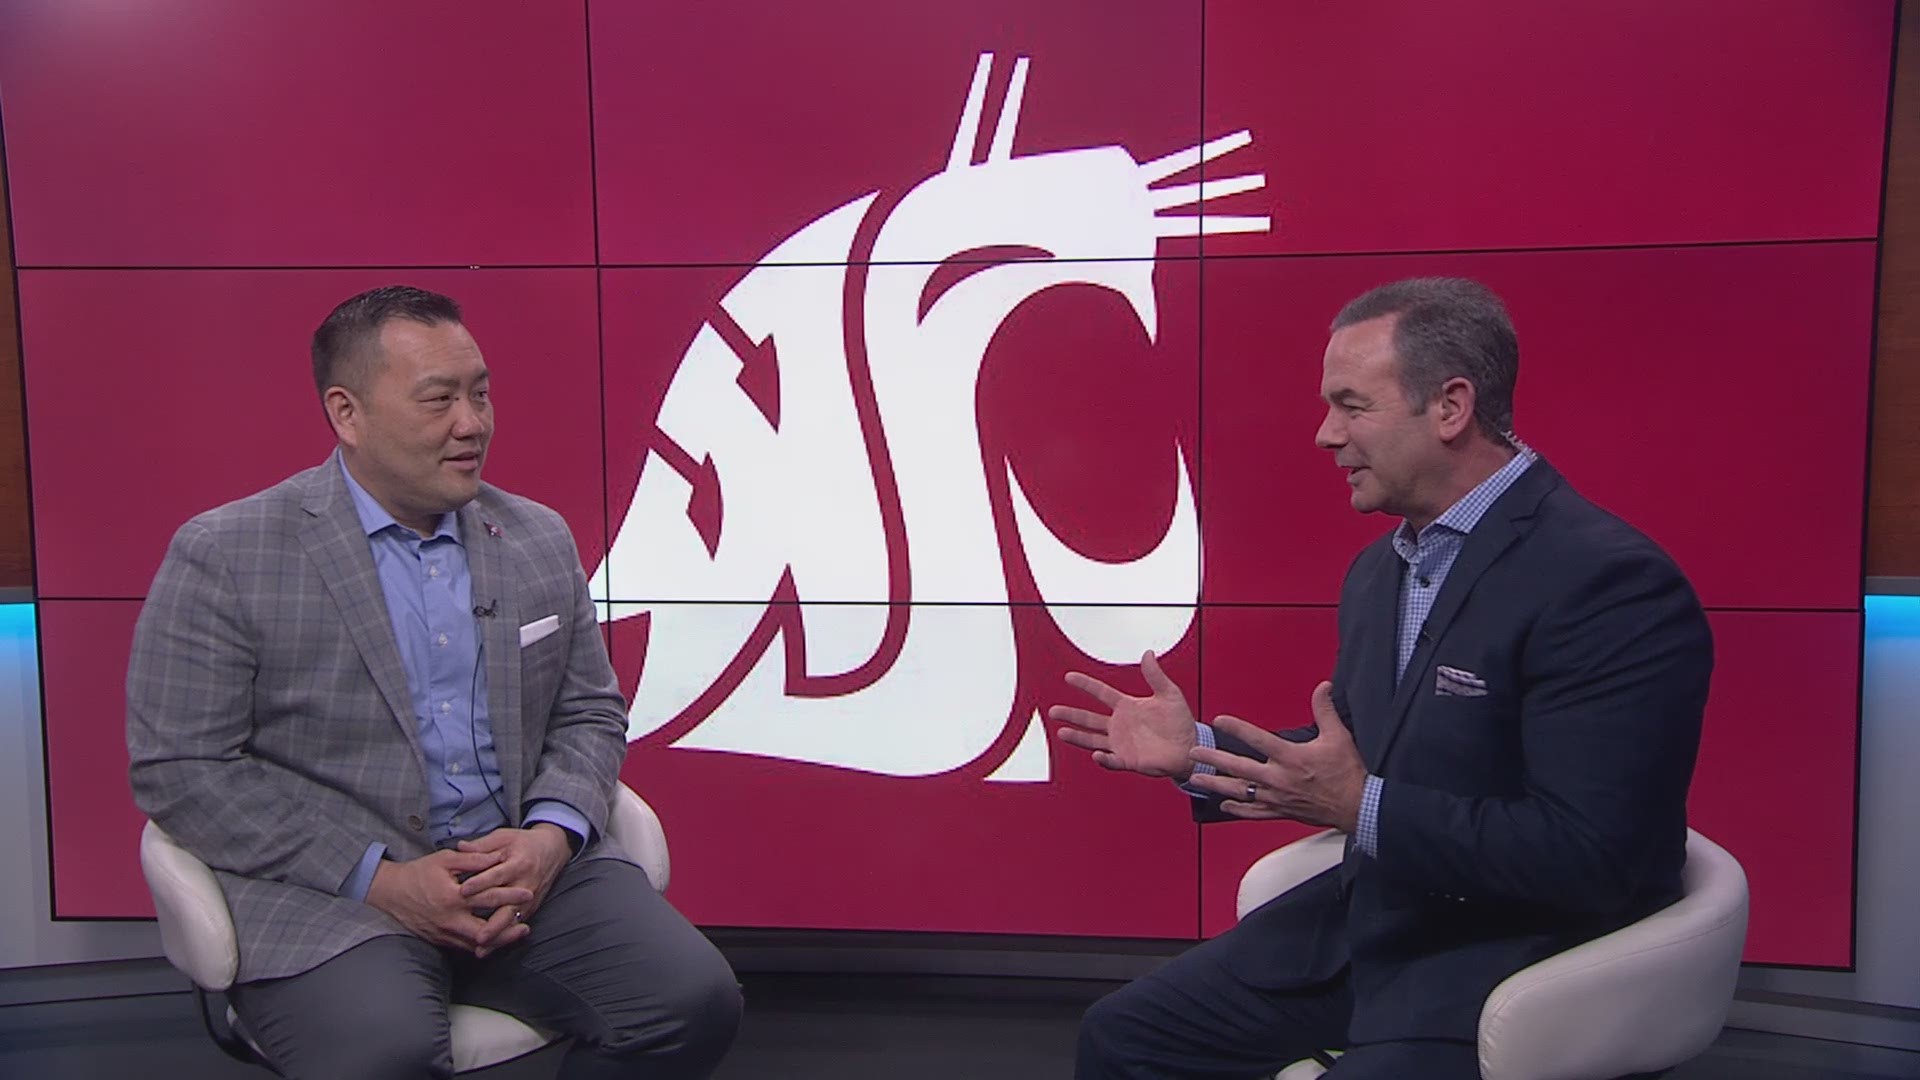 WSU Cougars Director of Athletics Pat Chun stopped by the KING 5 studios to talk about the latest in Pullman.  Chun gave his take on football coach Mike Leach, the future of men's basketball coach Ernie Kent, the shortfalls of the Pac-12 Network, and more.